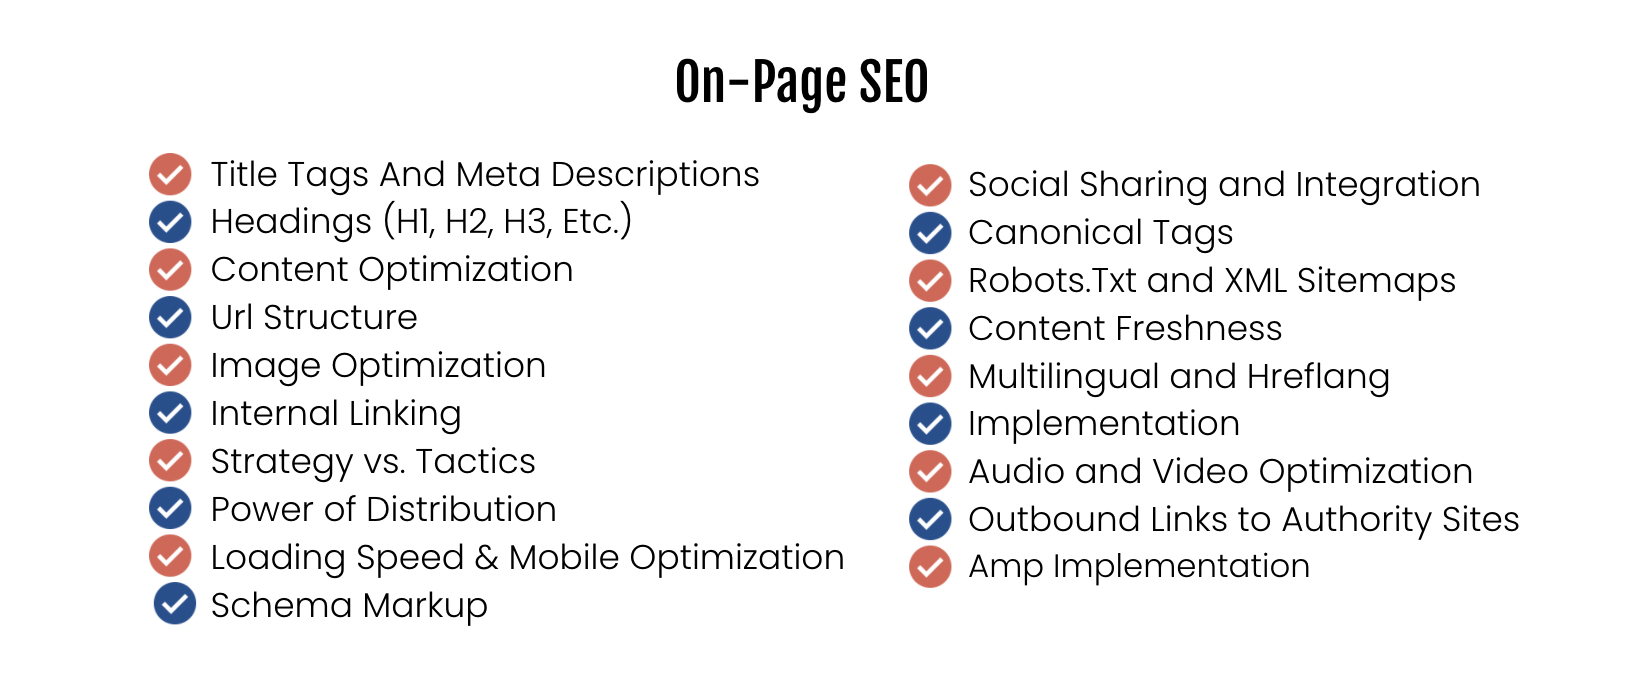 Parts of on-page SEO